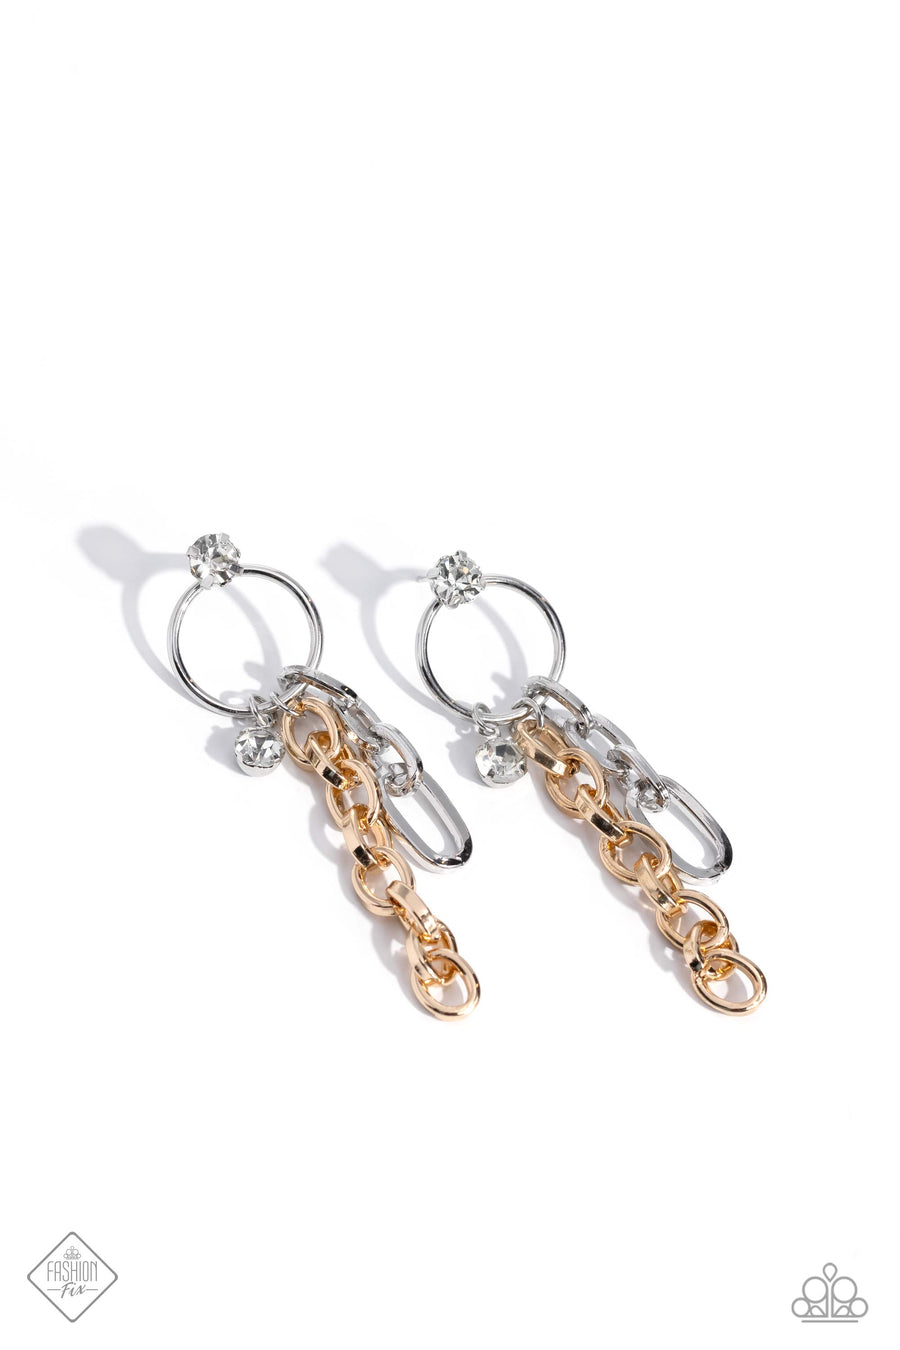 Two-Tone Trendsetter - Multi Metal Earrings - Paparazzi Accessories - A strand of oversized silver chain links slides along the bottom of a simple silver hoop, colliding with a solitaire rhinestone and a cascade of shimmery gold chain. A classic white rhinestone sits atop the silver hoop, anchoring the industrial mashup to a glitzy foundation. Earring attaches to a standard post fitting. Sold as one pair of post earrings.